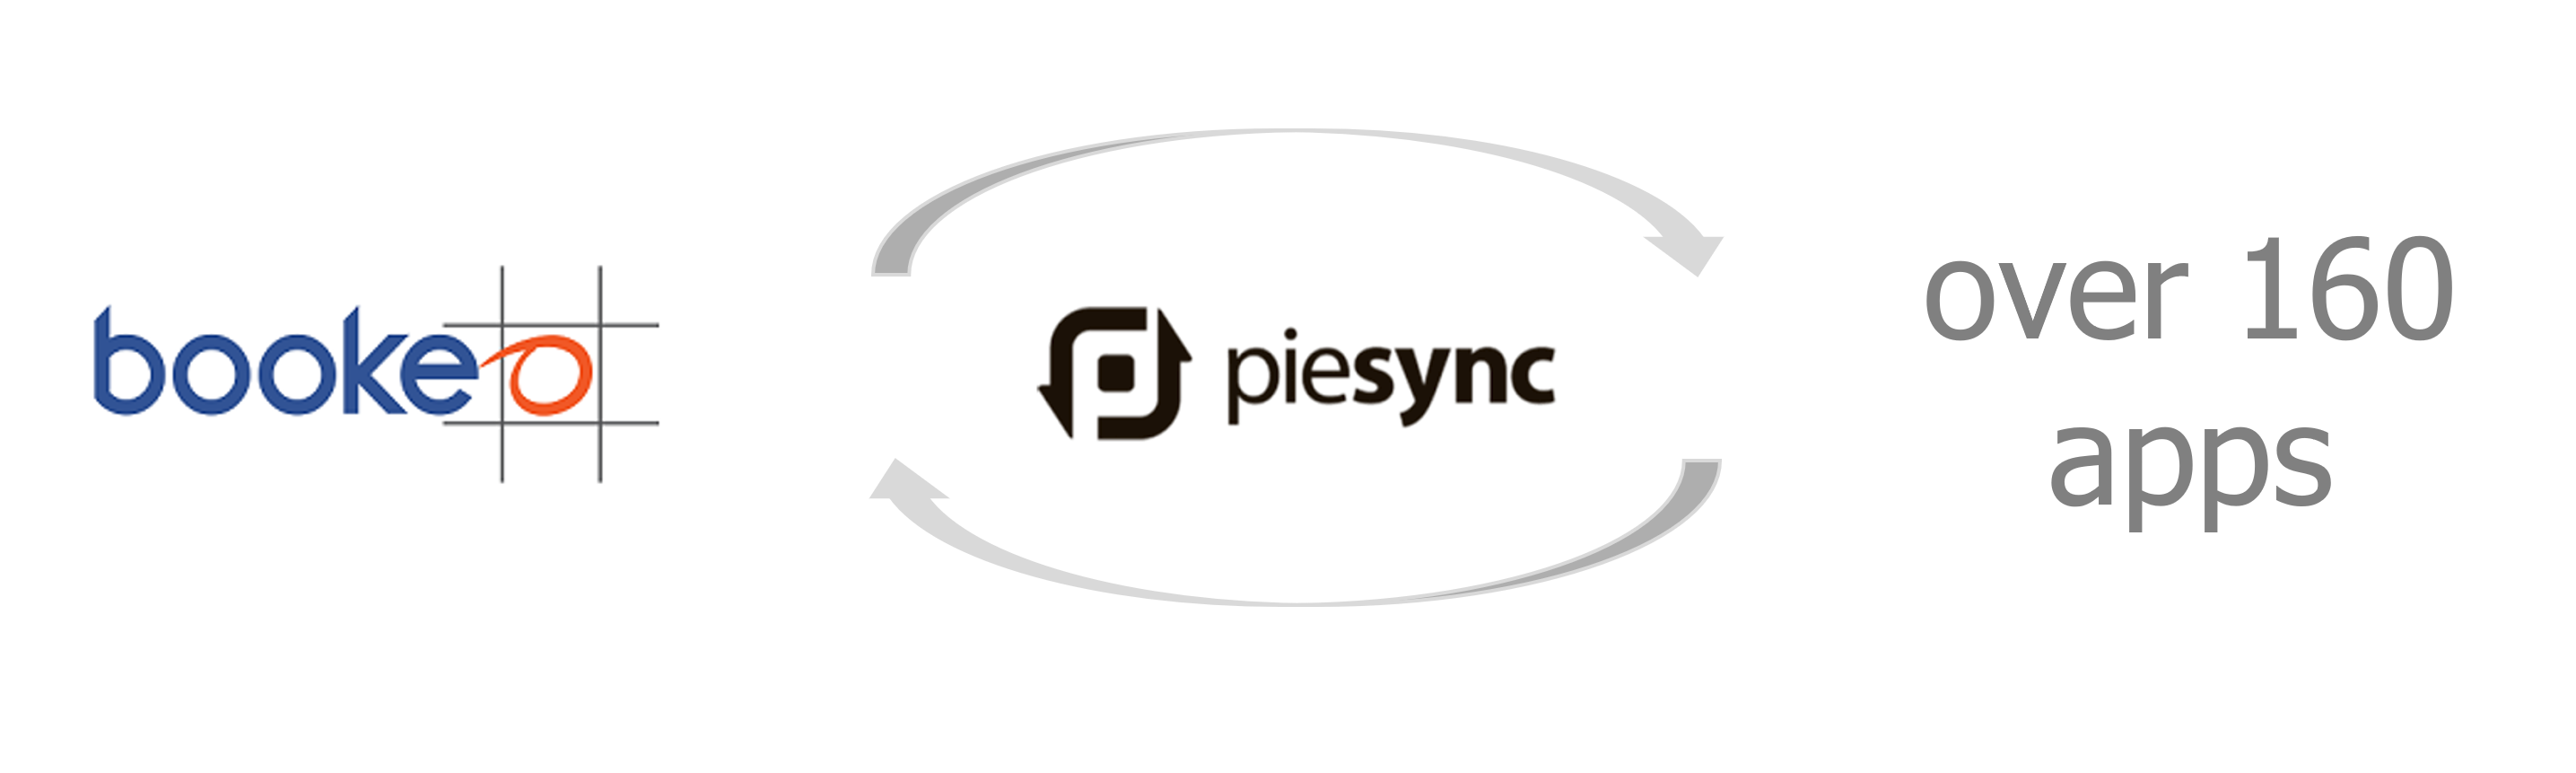 Sync customers between Bookeo and over 160 apps with Piesync